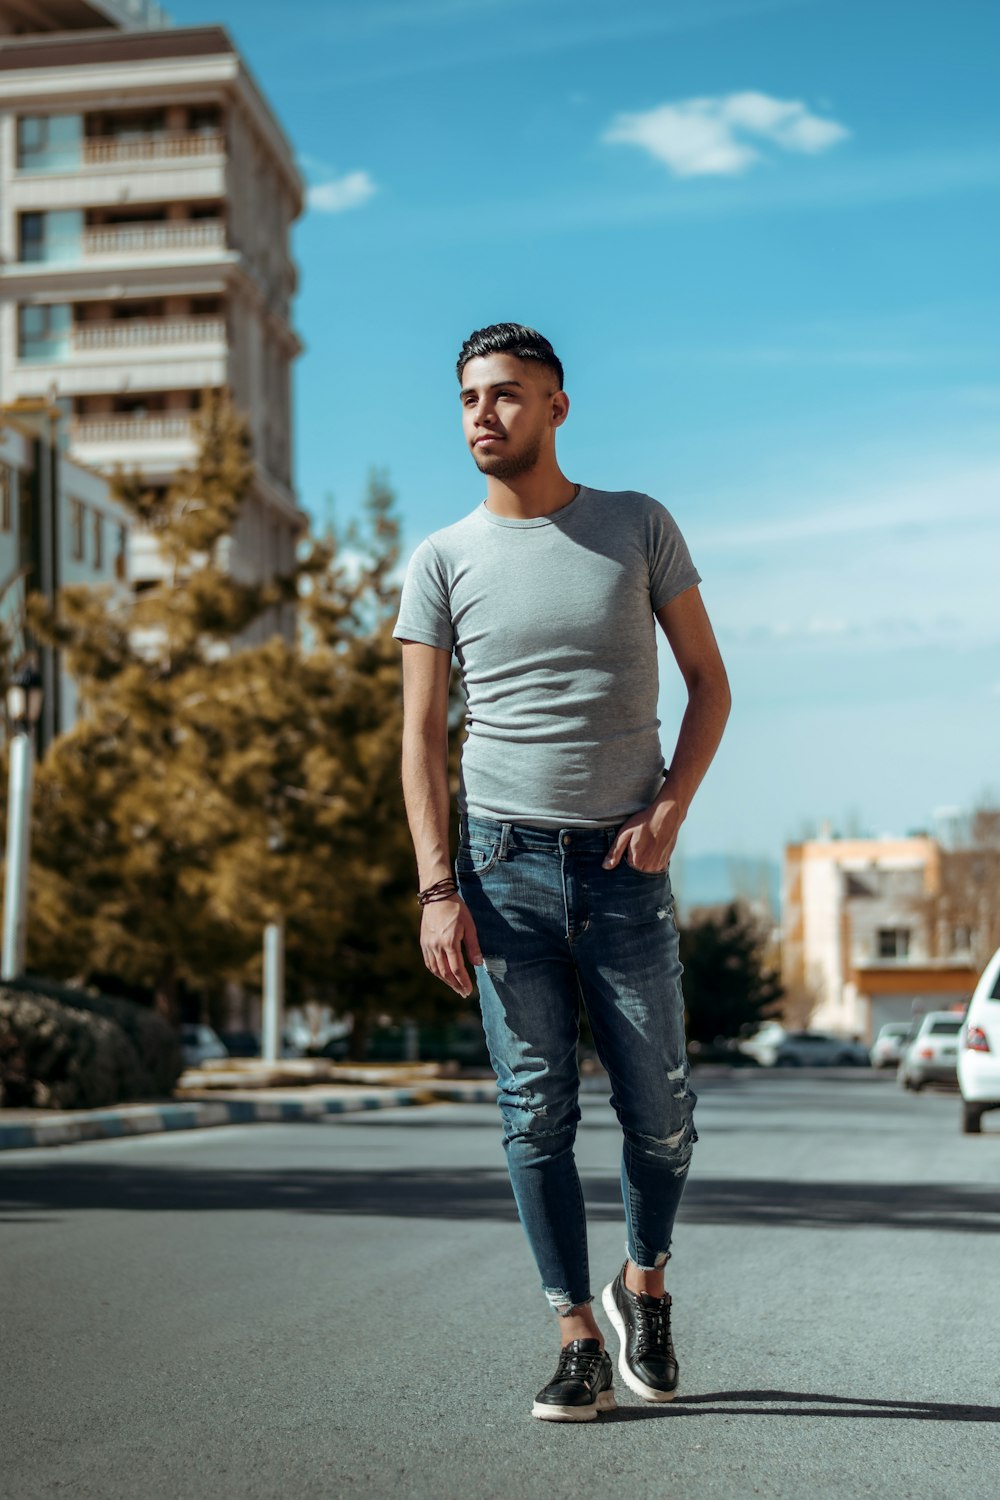 Man in white crew neck t-shirt and blue denim jeans standing on road during  daytime photo – Free Hamedan Image on Unsplash